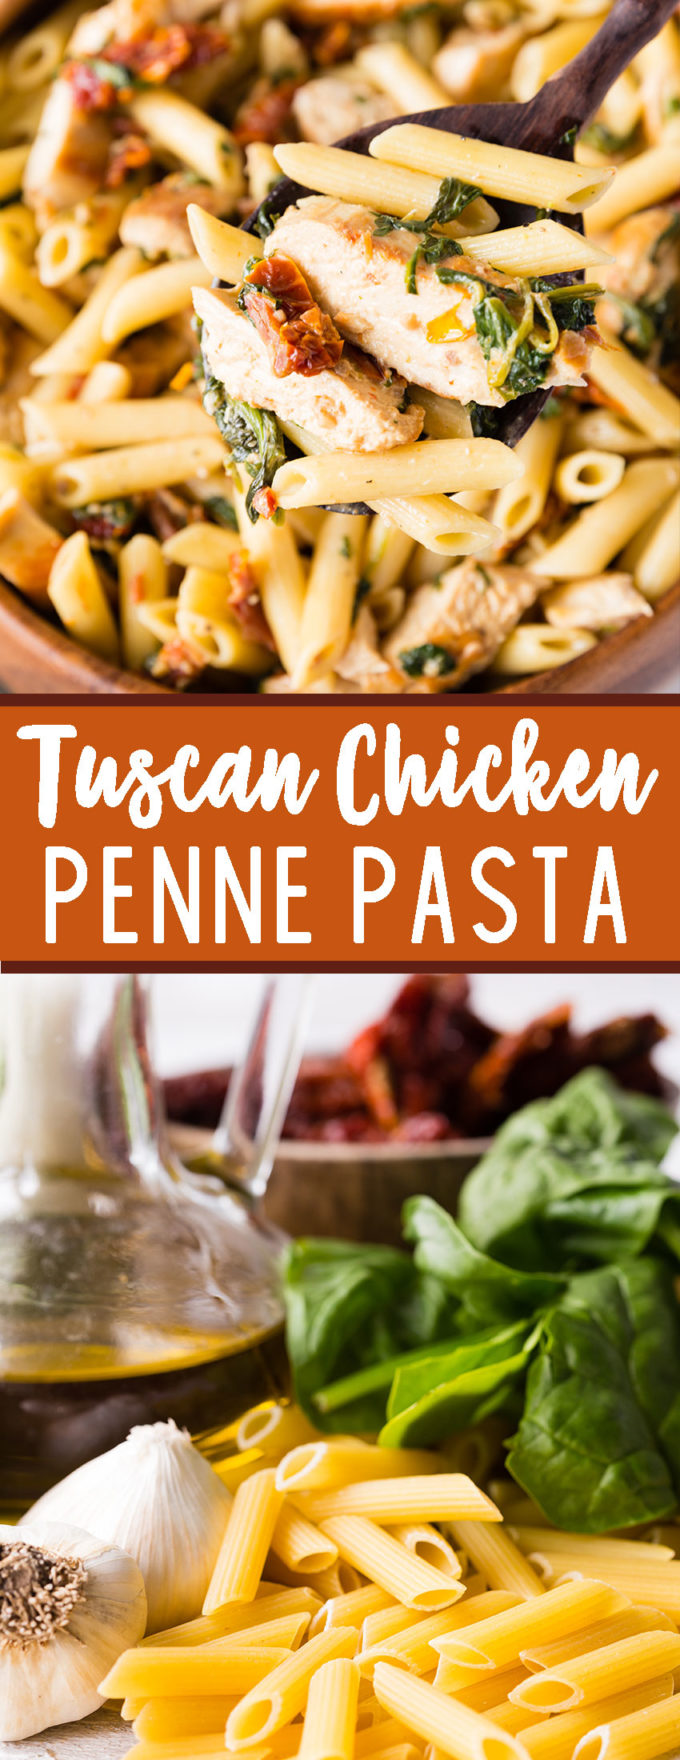 Tuscan Chicken Penne Pasta is a rich and delicious penne pasta meal stuffed with chicken, sun dried tomatoes, spinach, and more. 